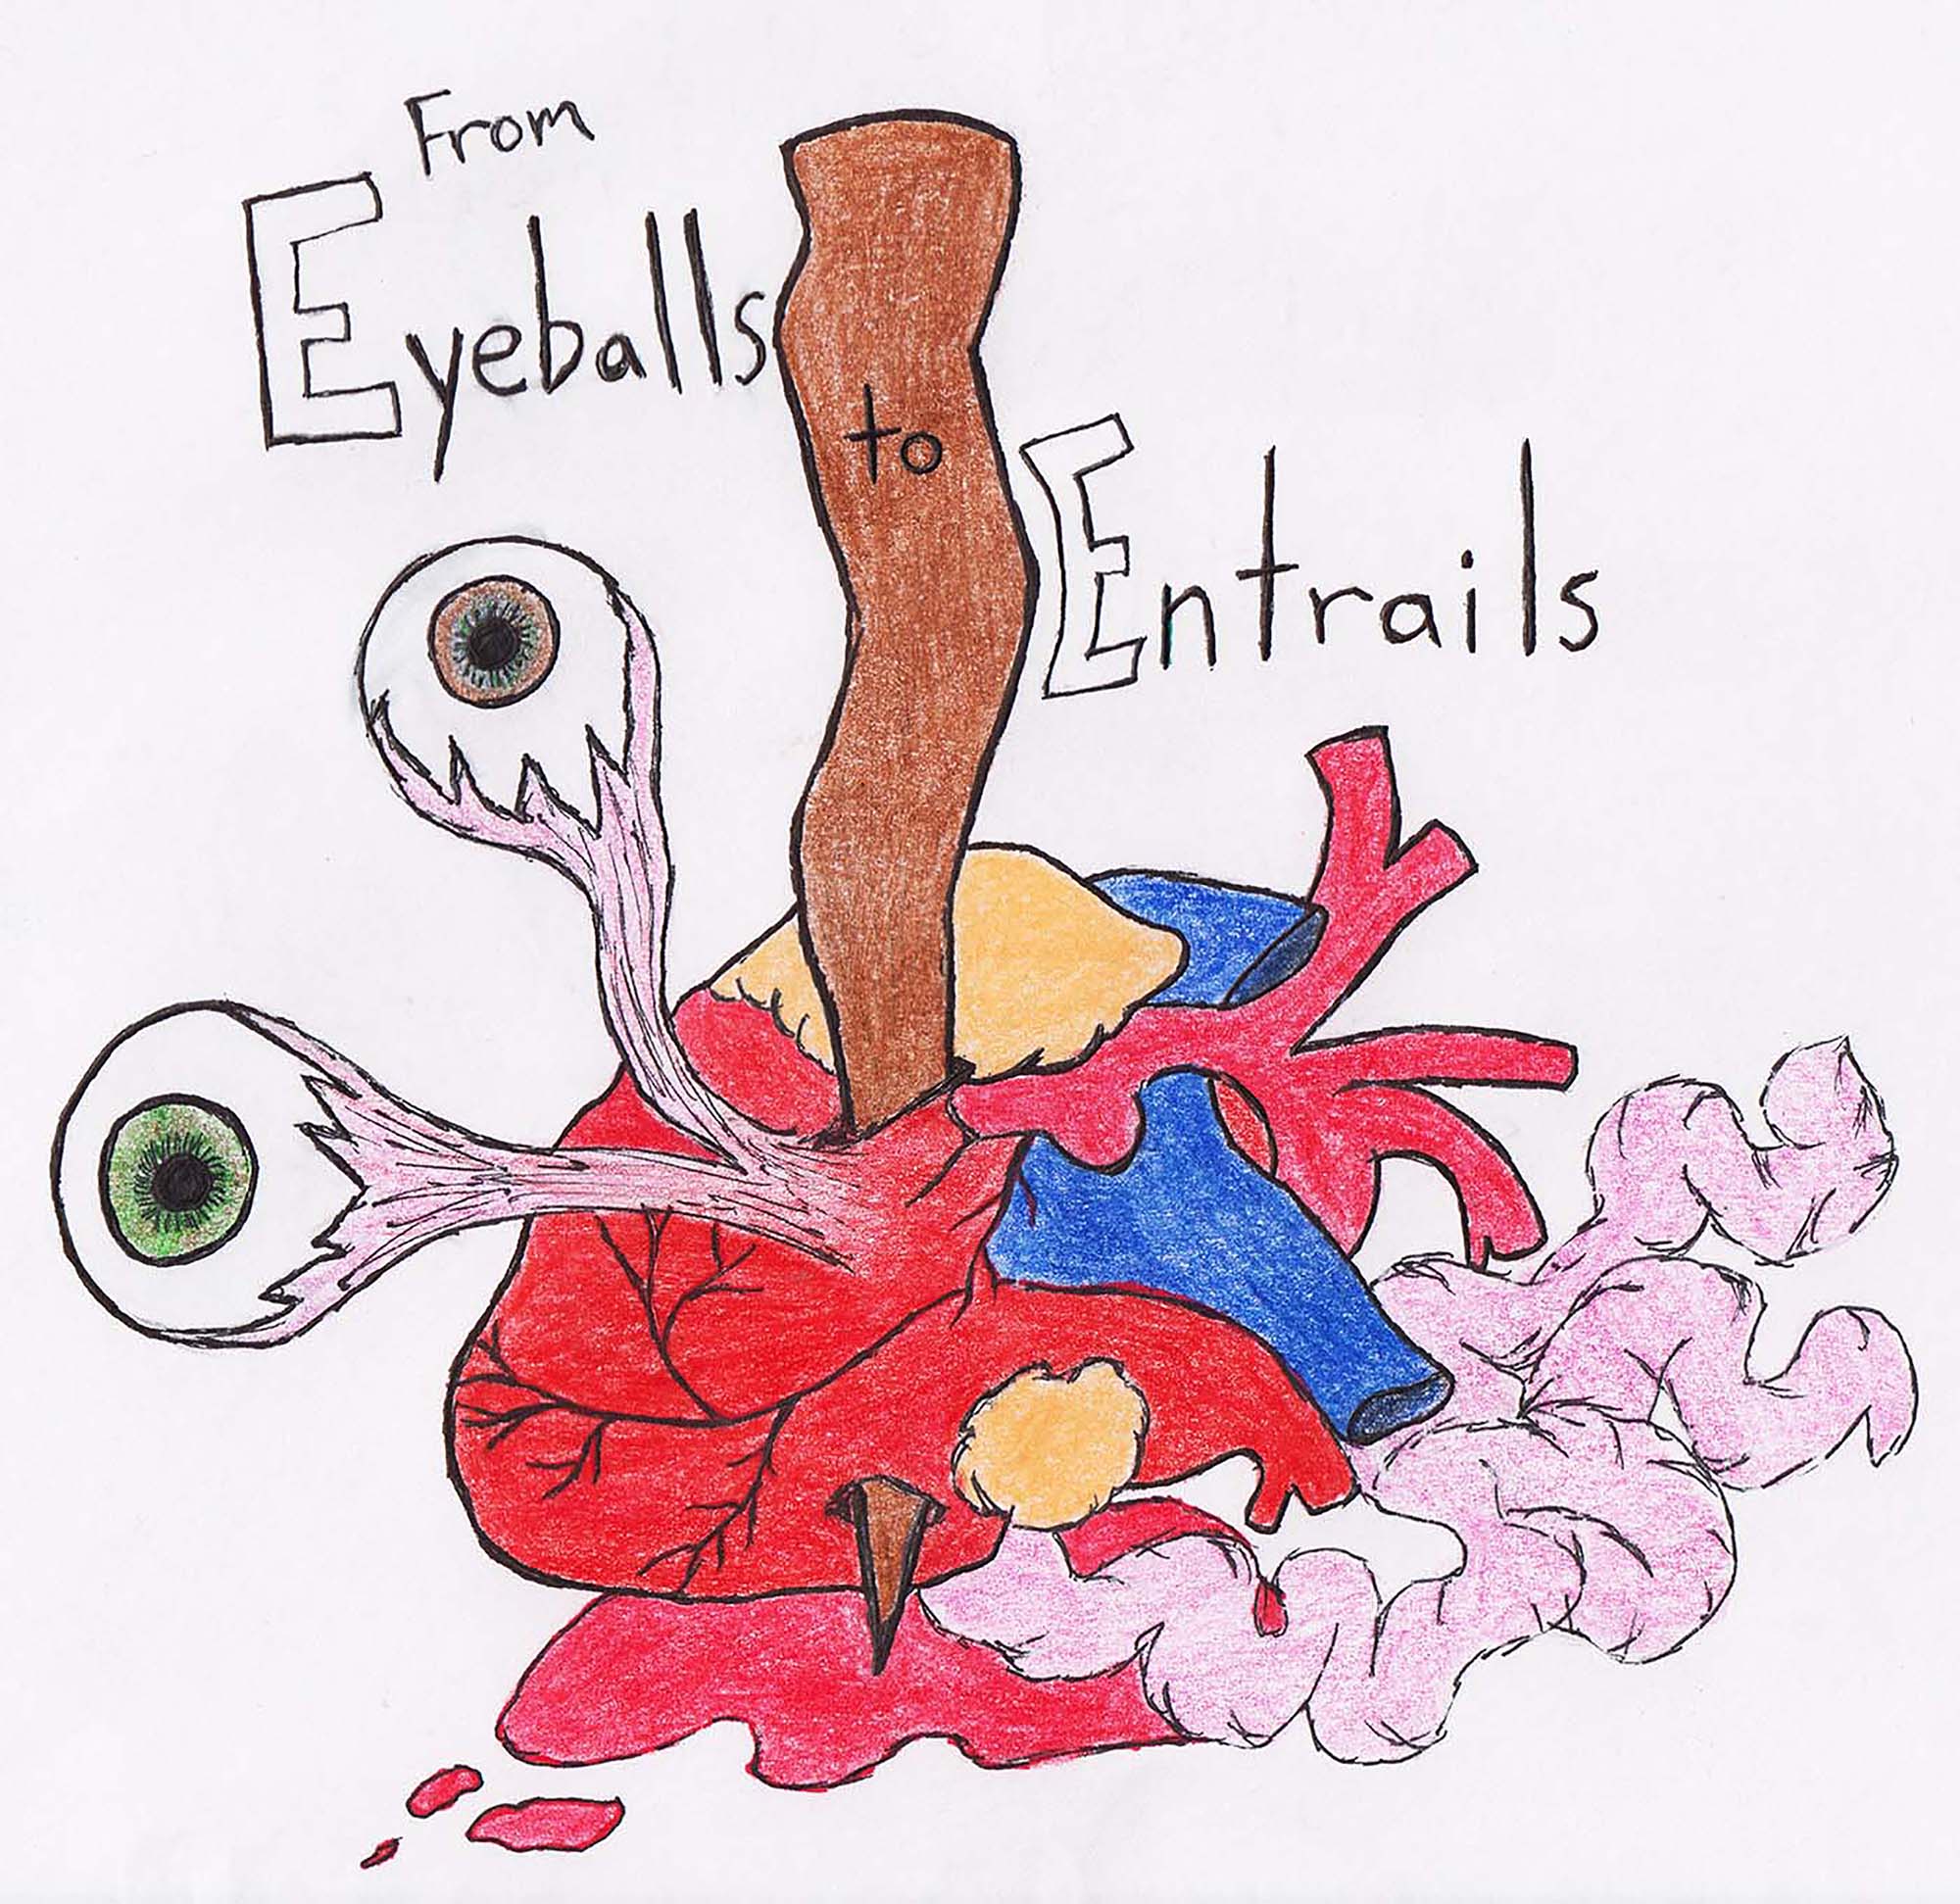 From Eyeballs to Entrails